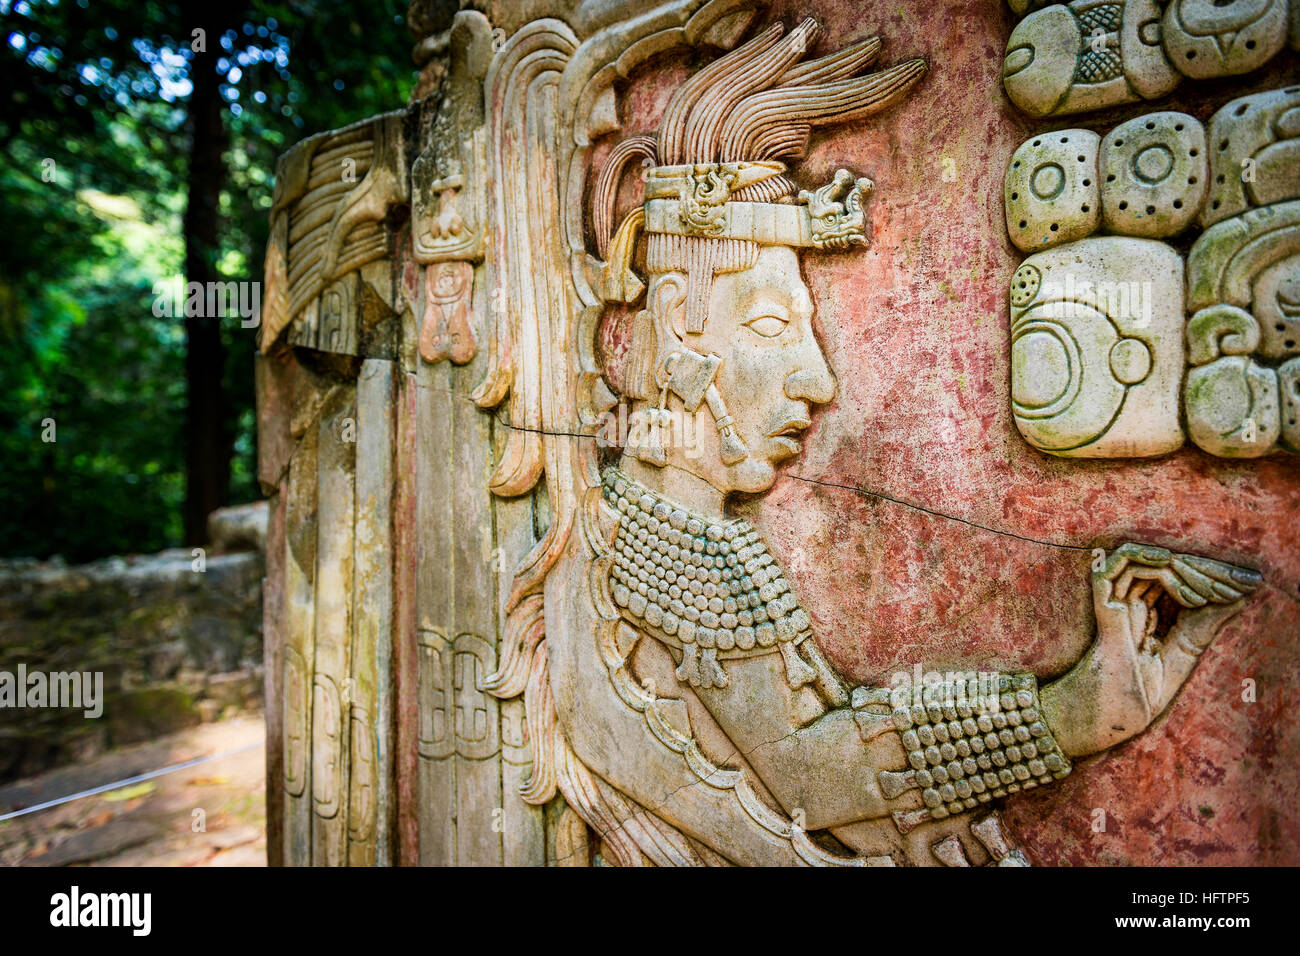 Detail of a bas-relief carving in the ancient Mayan city of Palenque, Chiapas, Mexico Stock Photo